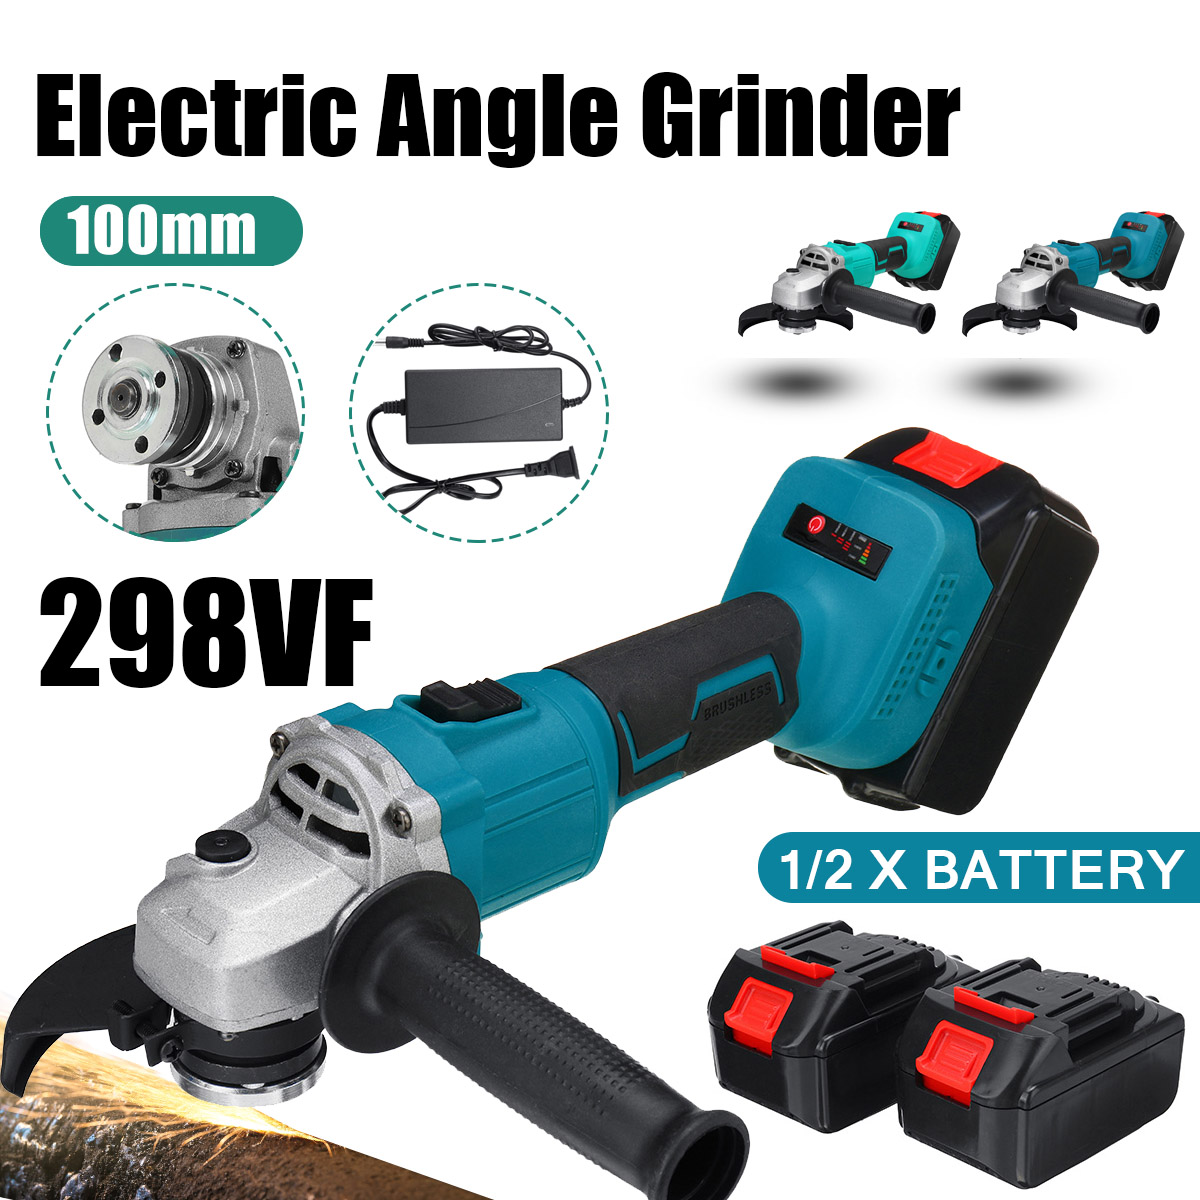 100mm-Brushless-Cordless-Angle-Grinder-3-Gears-Polishing-Grinding-Cutting-Tool-With-Battery-Also-For-1858791-5